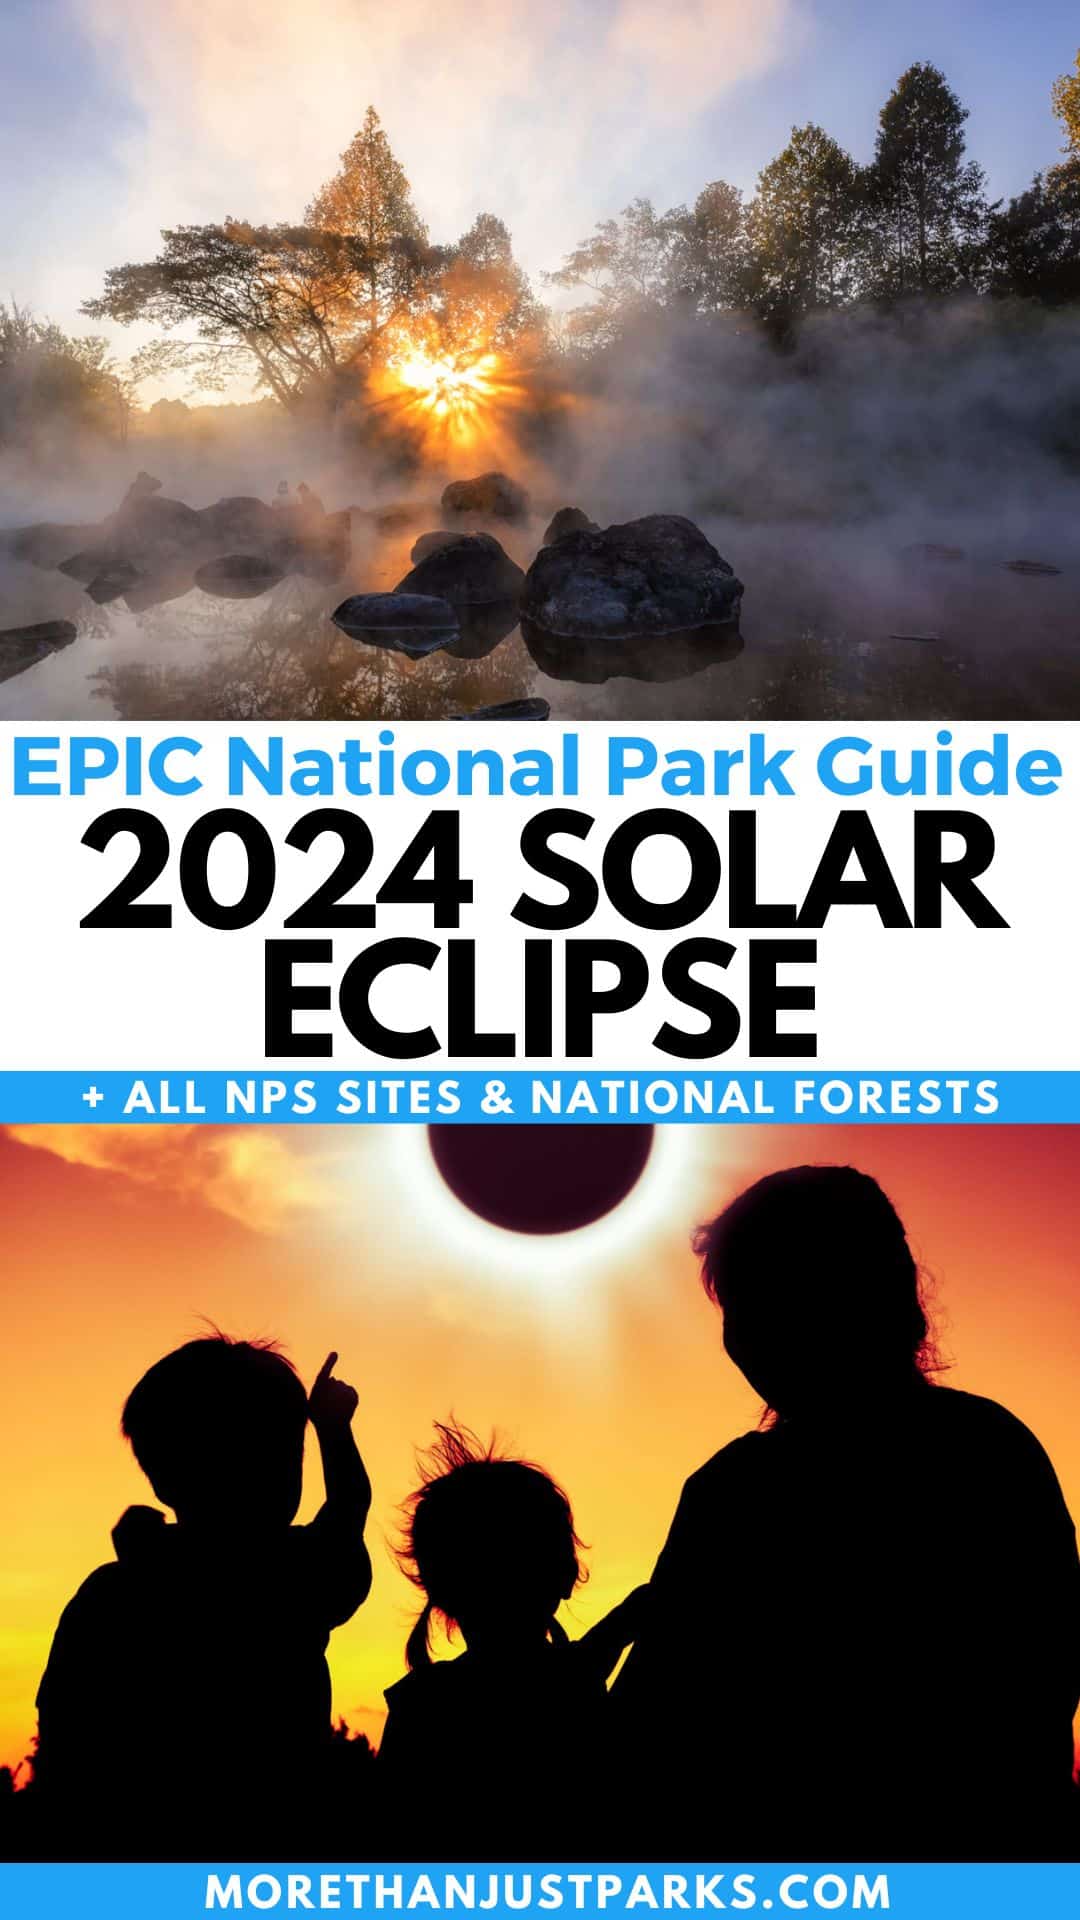 Graphics Reads "EPIC National Park Guide for 2024 Solar Eclipse Plus All NPS Sites & National Forests"